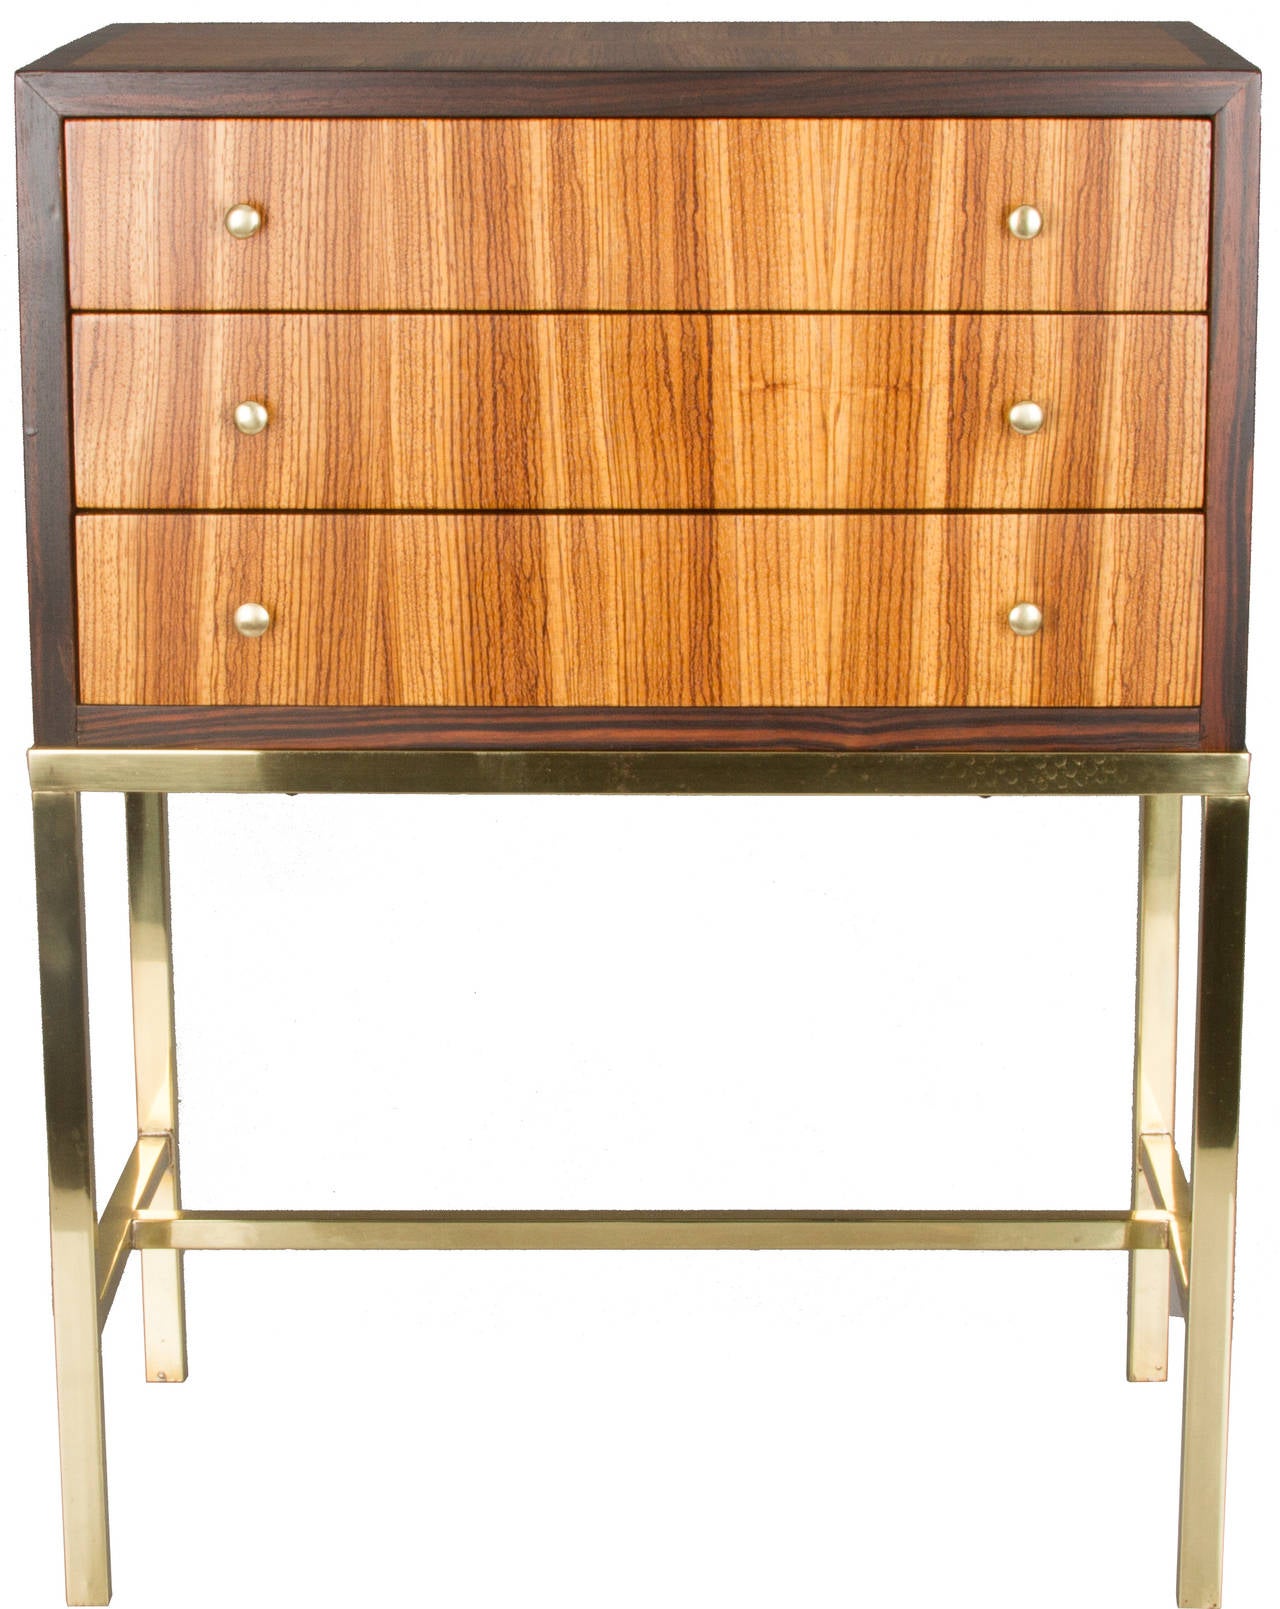 This is a great small scale chest with a clean and beautiful design.  It  also works as an end table